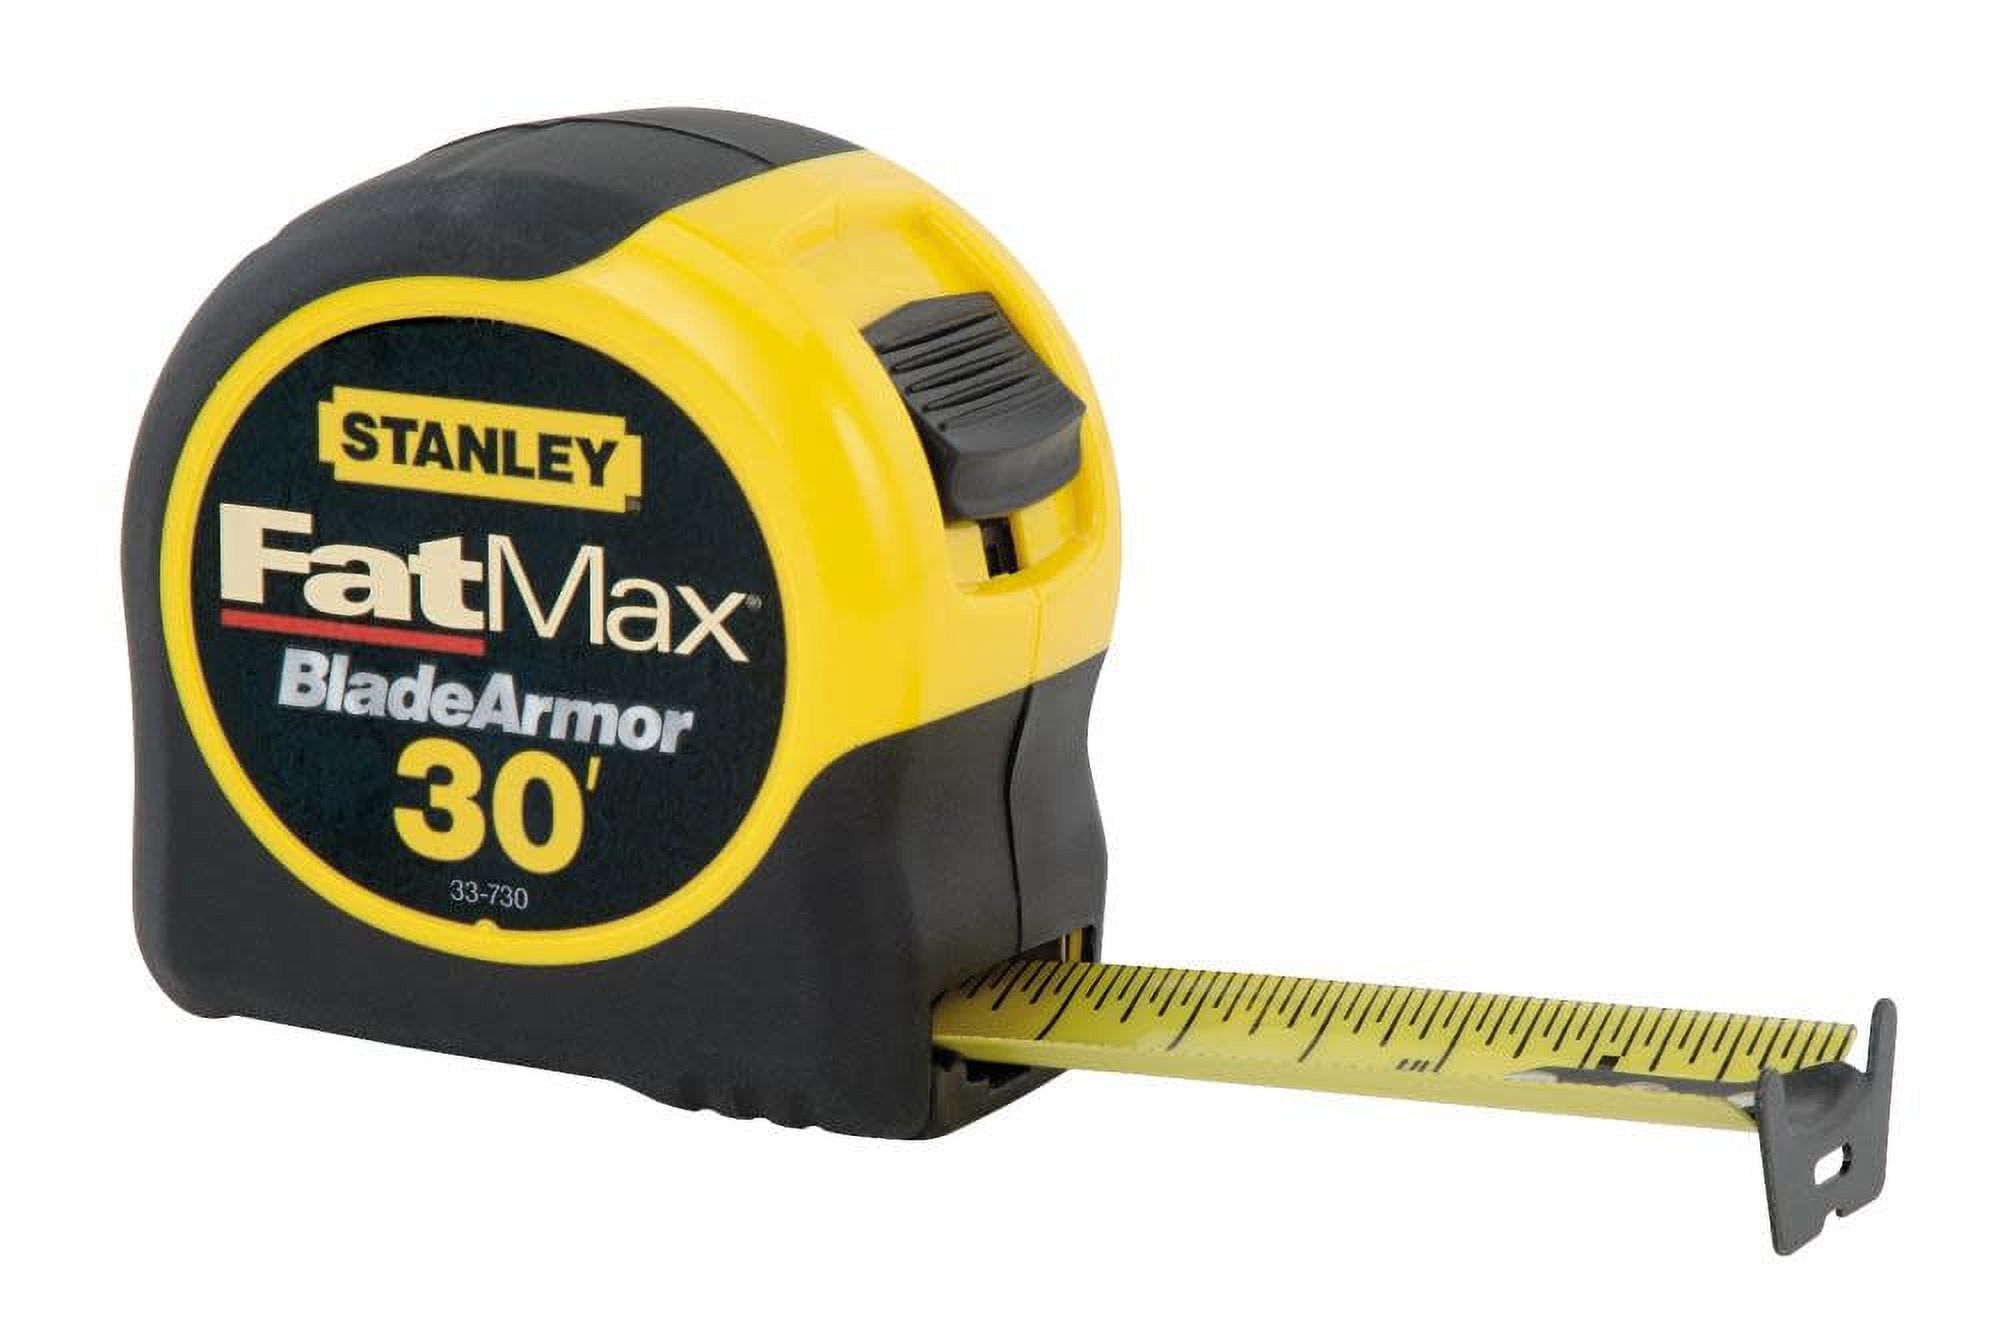 Stanley Tools Fat Max Tape Rule 1 1/4" x 30ft Plastic Case Black/Yellow 1/16" Graduation 33730 - image 1 of 3